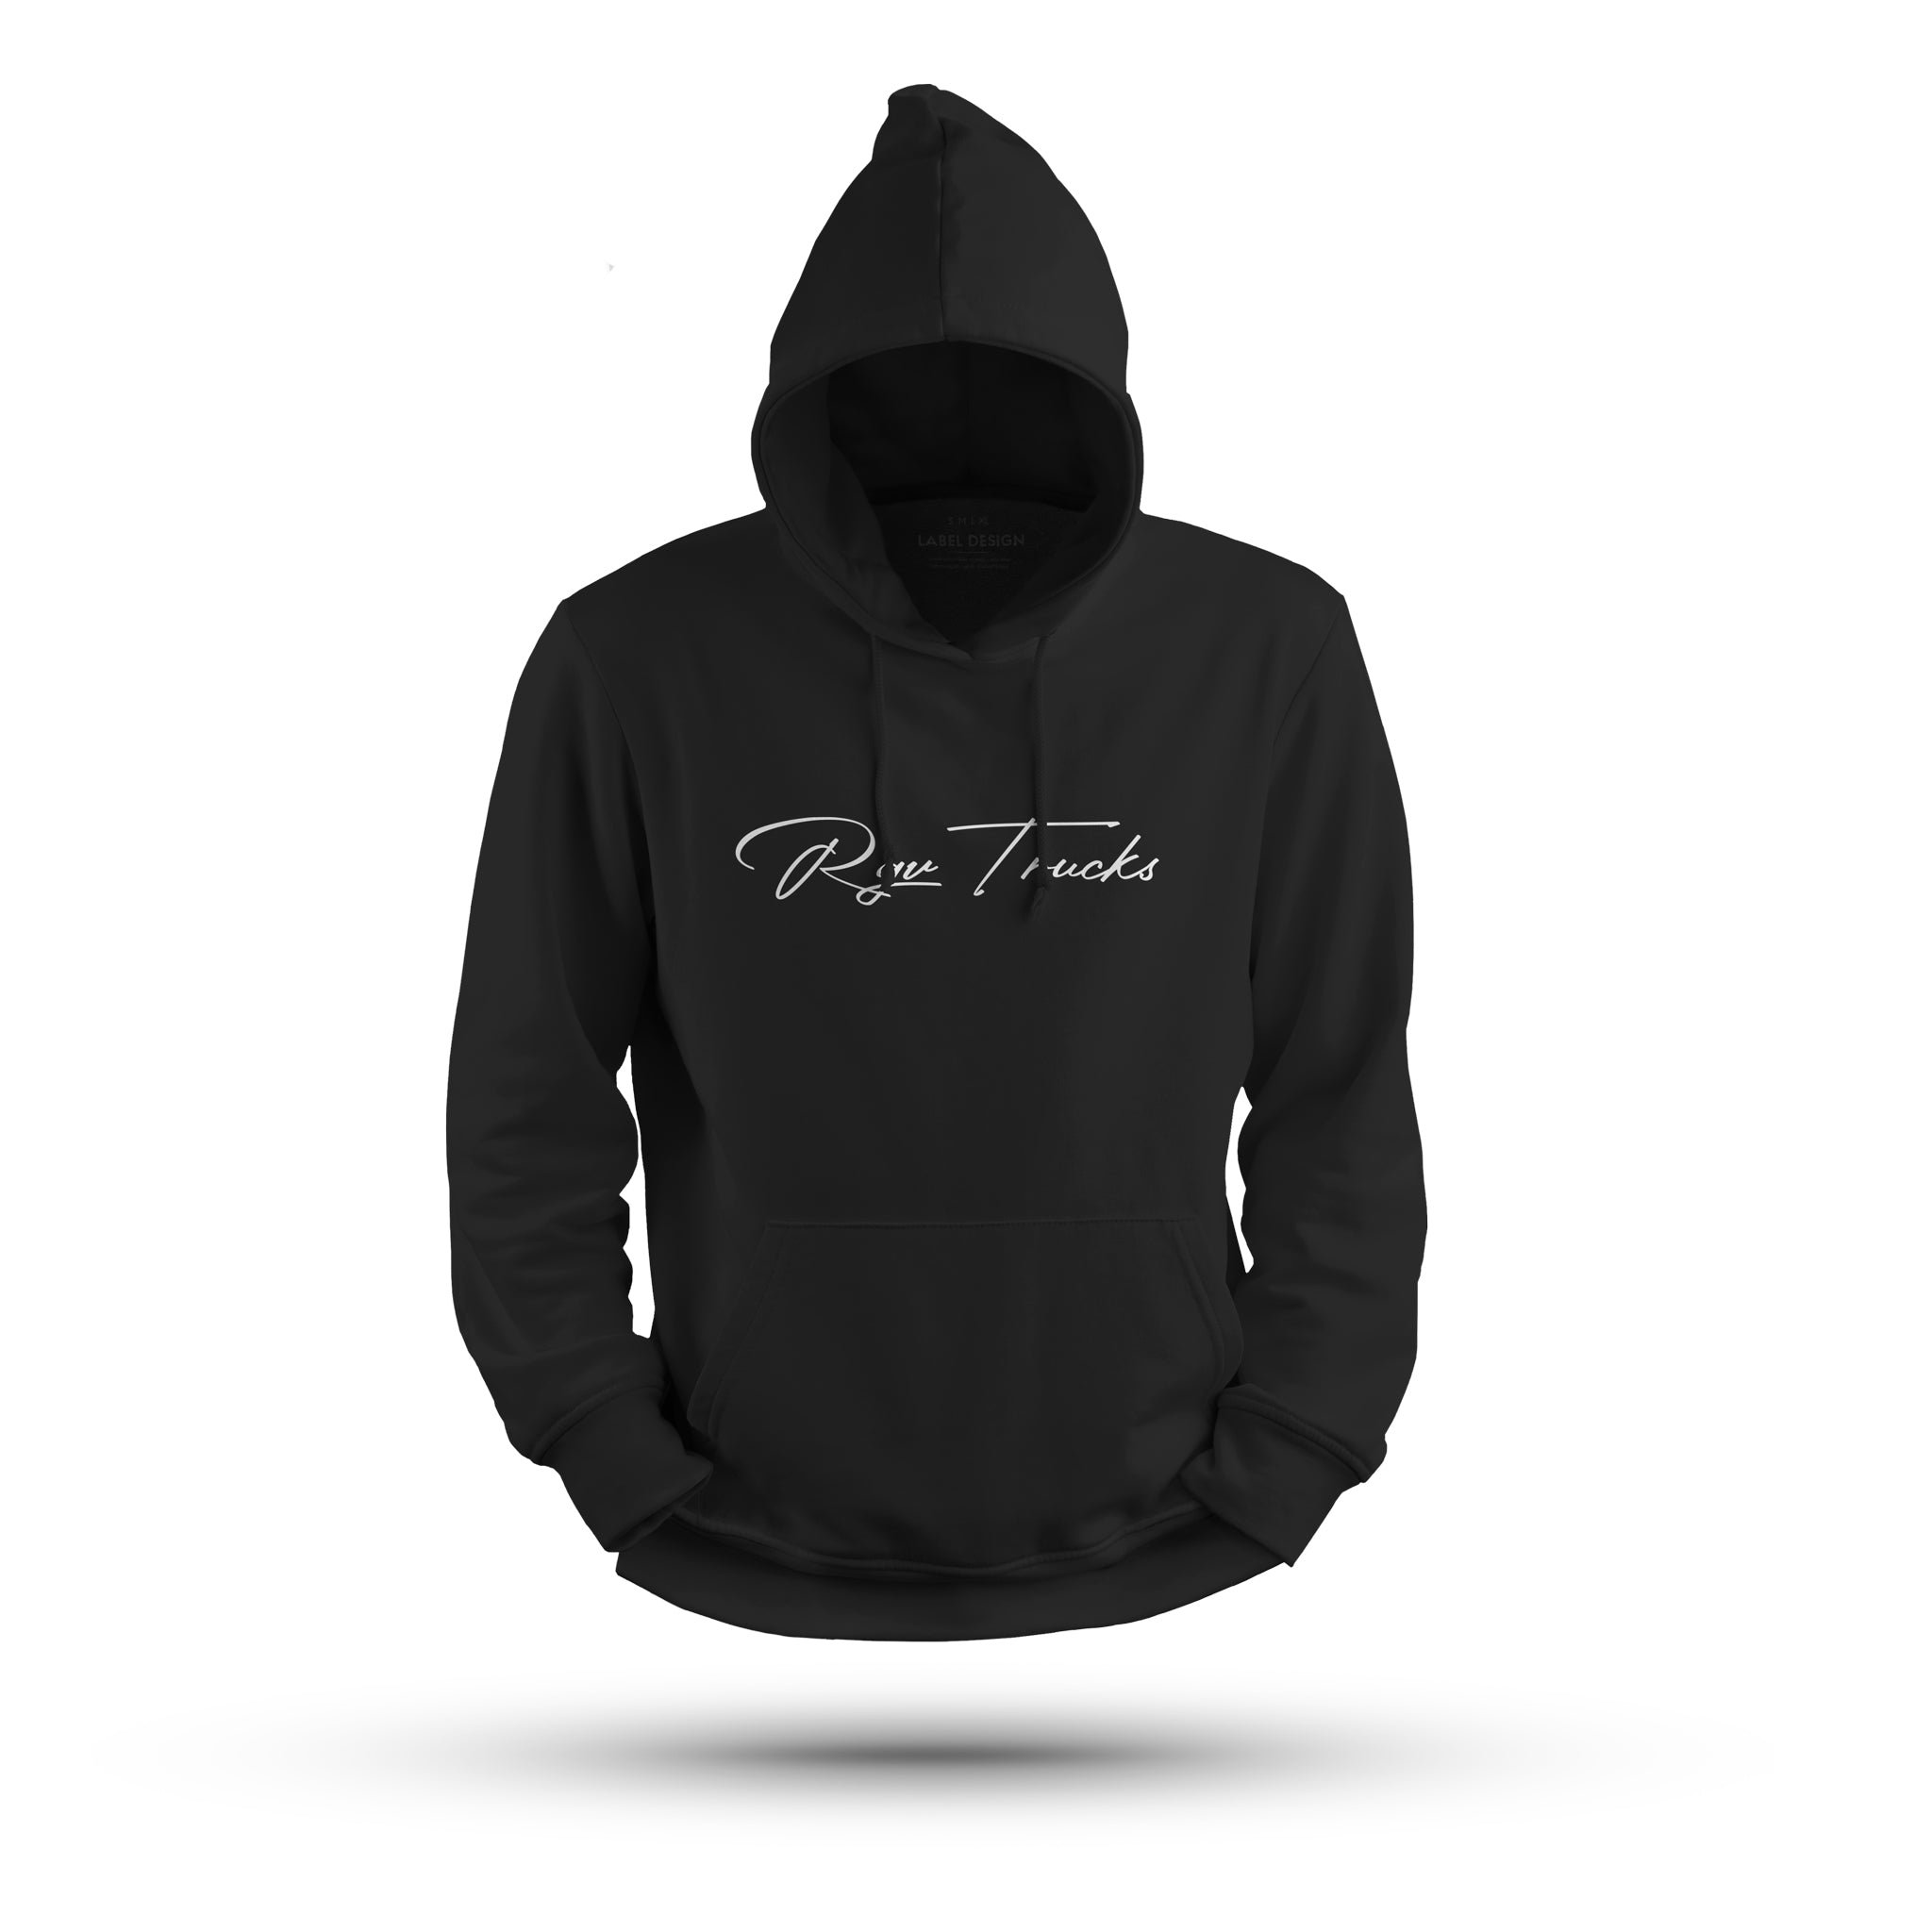 Chase Your Build - Hoodie